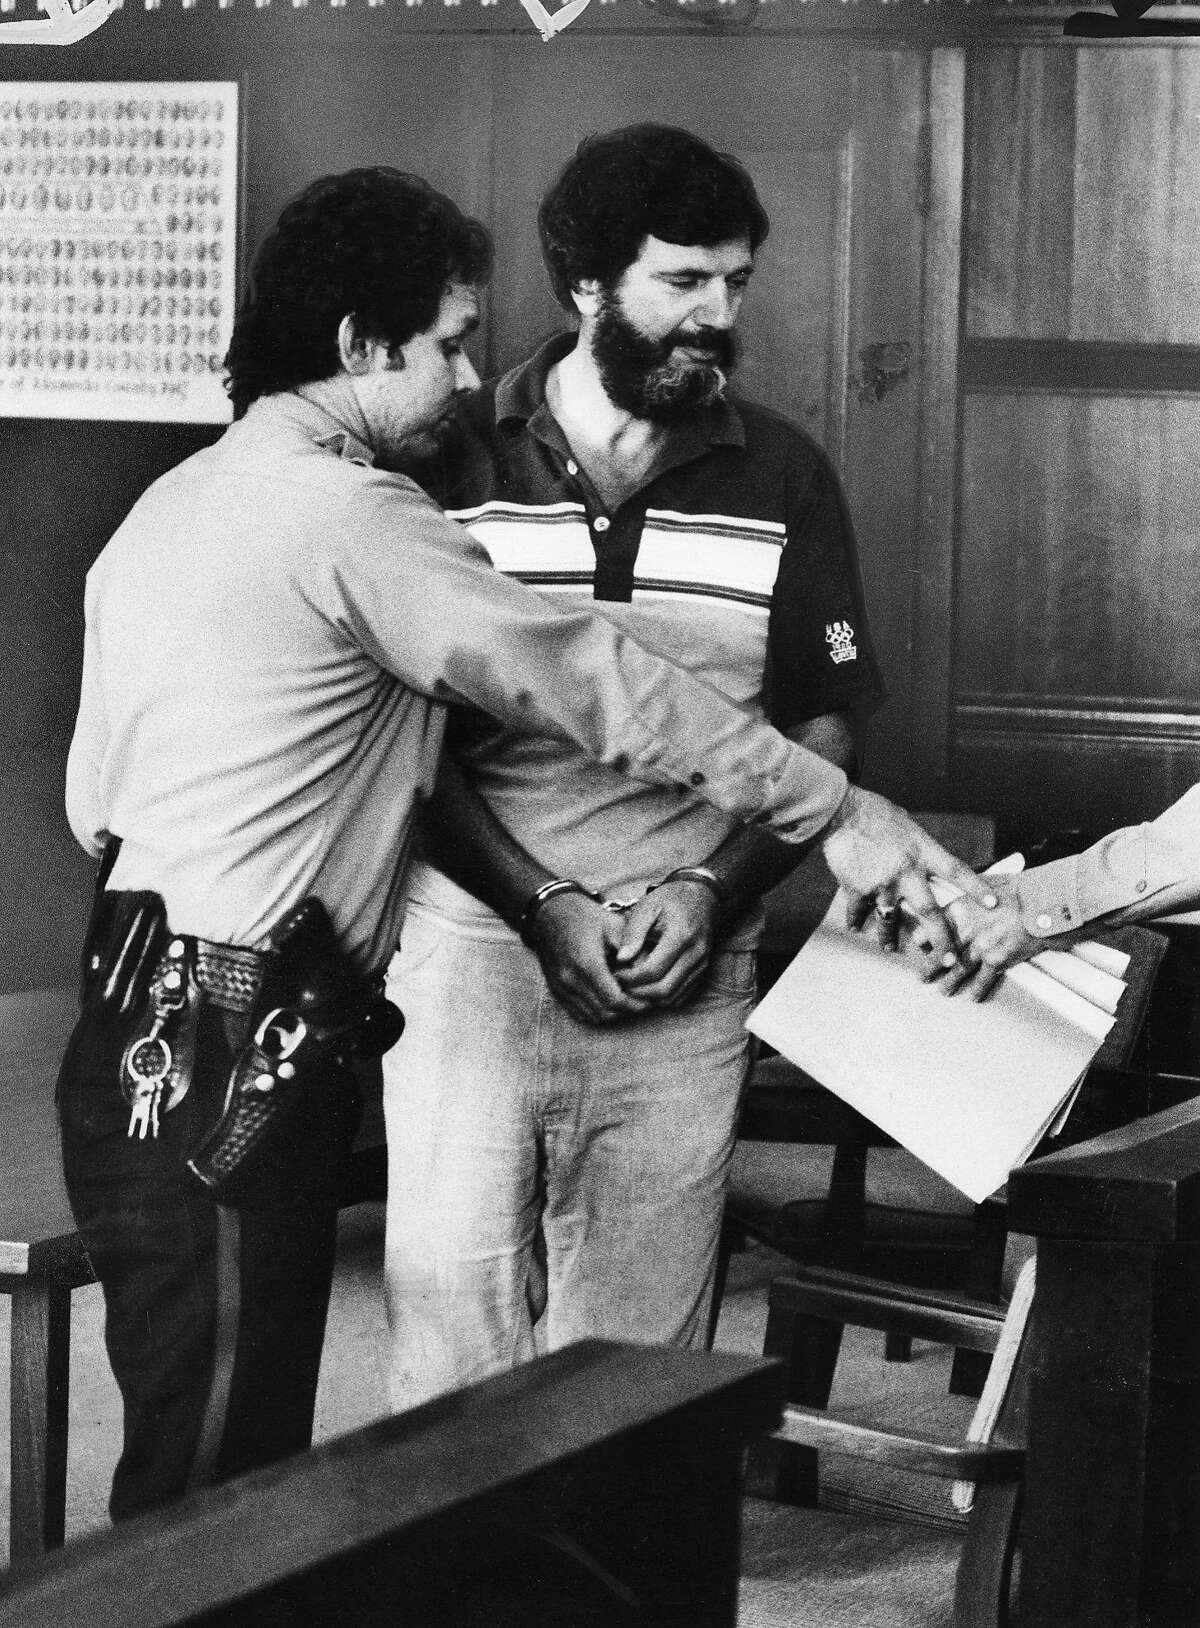 Salvatore "Bill" Bonanno leaves Oakland court after arraignment on November 25, 1981 in Oakland, Calif.